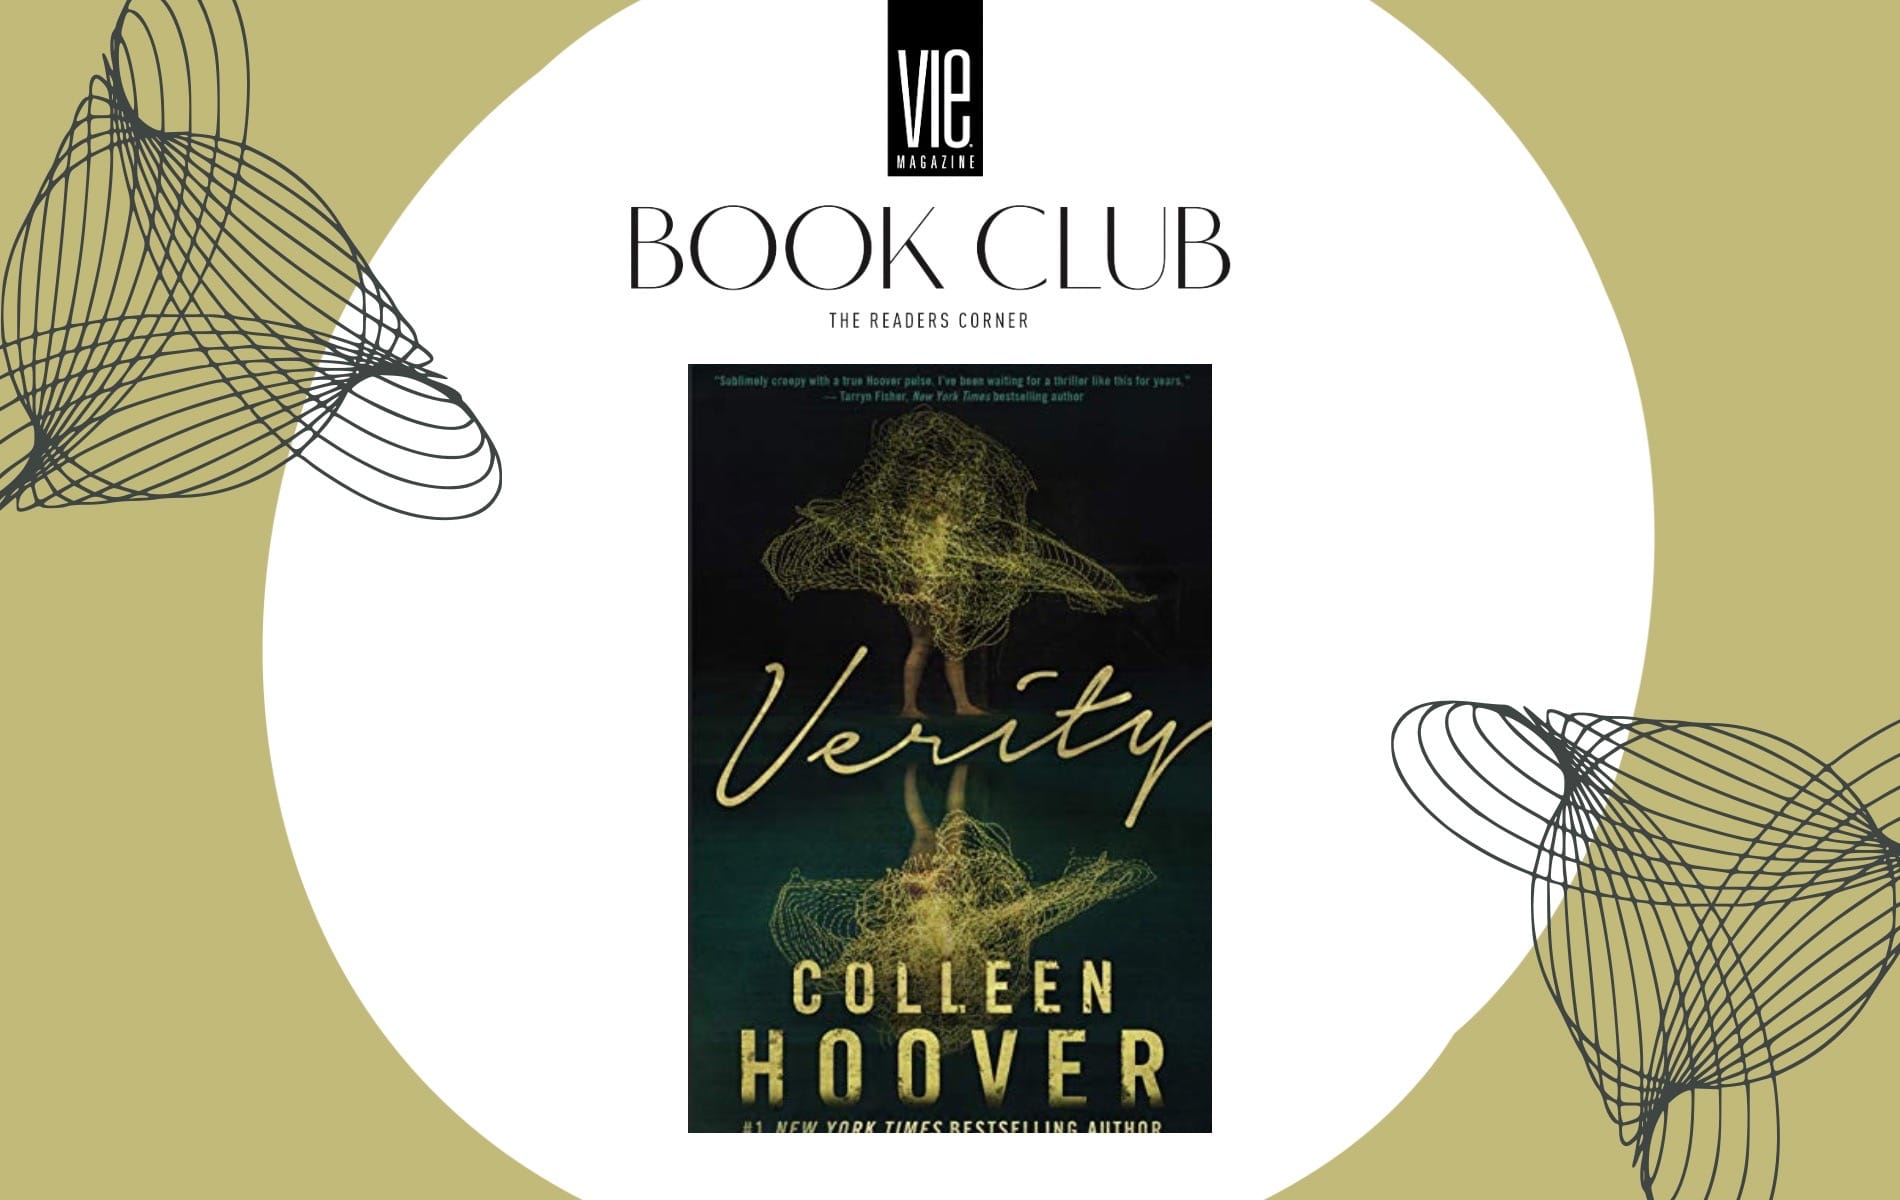 Verity by Colleen Hoover Book Review